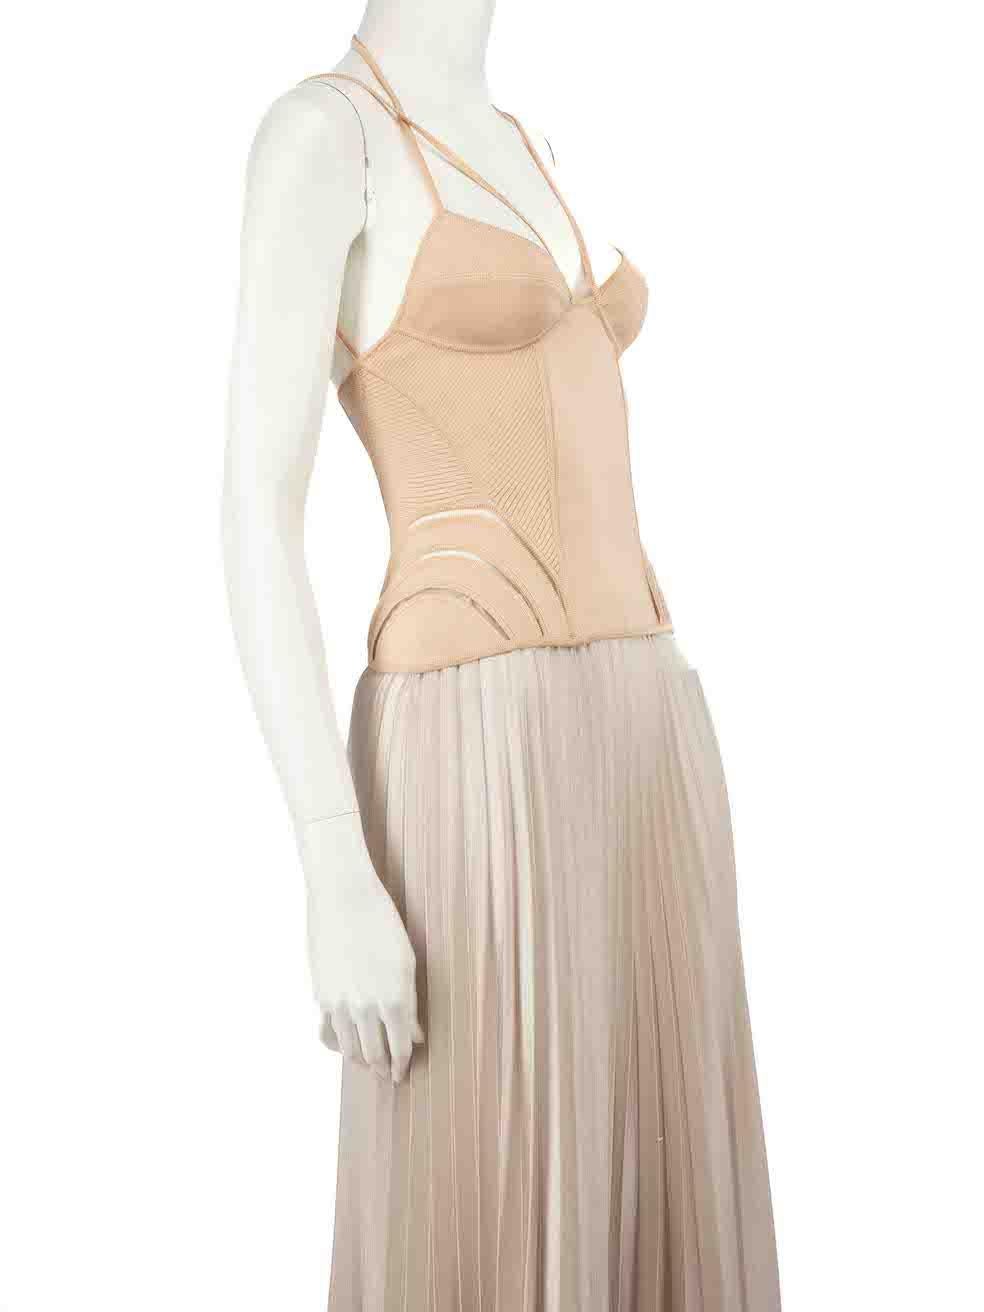 CONDITION is Very good. Minimal wear to top is evident. Minimal pulls to fabric on front central panel and on back left triangular panel on this used Alexander McQueen designer resale item.
 
 
 
 Details
 
 
 Beige
 
 Viscose
 
 Tank top
 
 Boned
